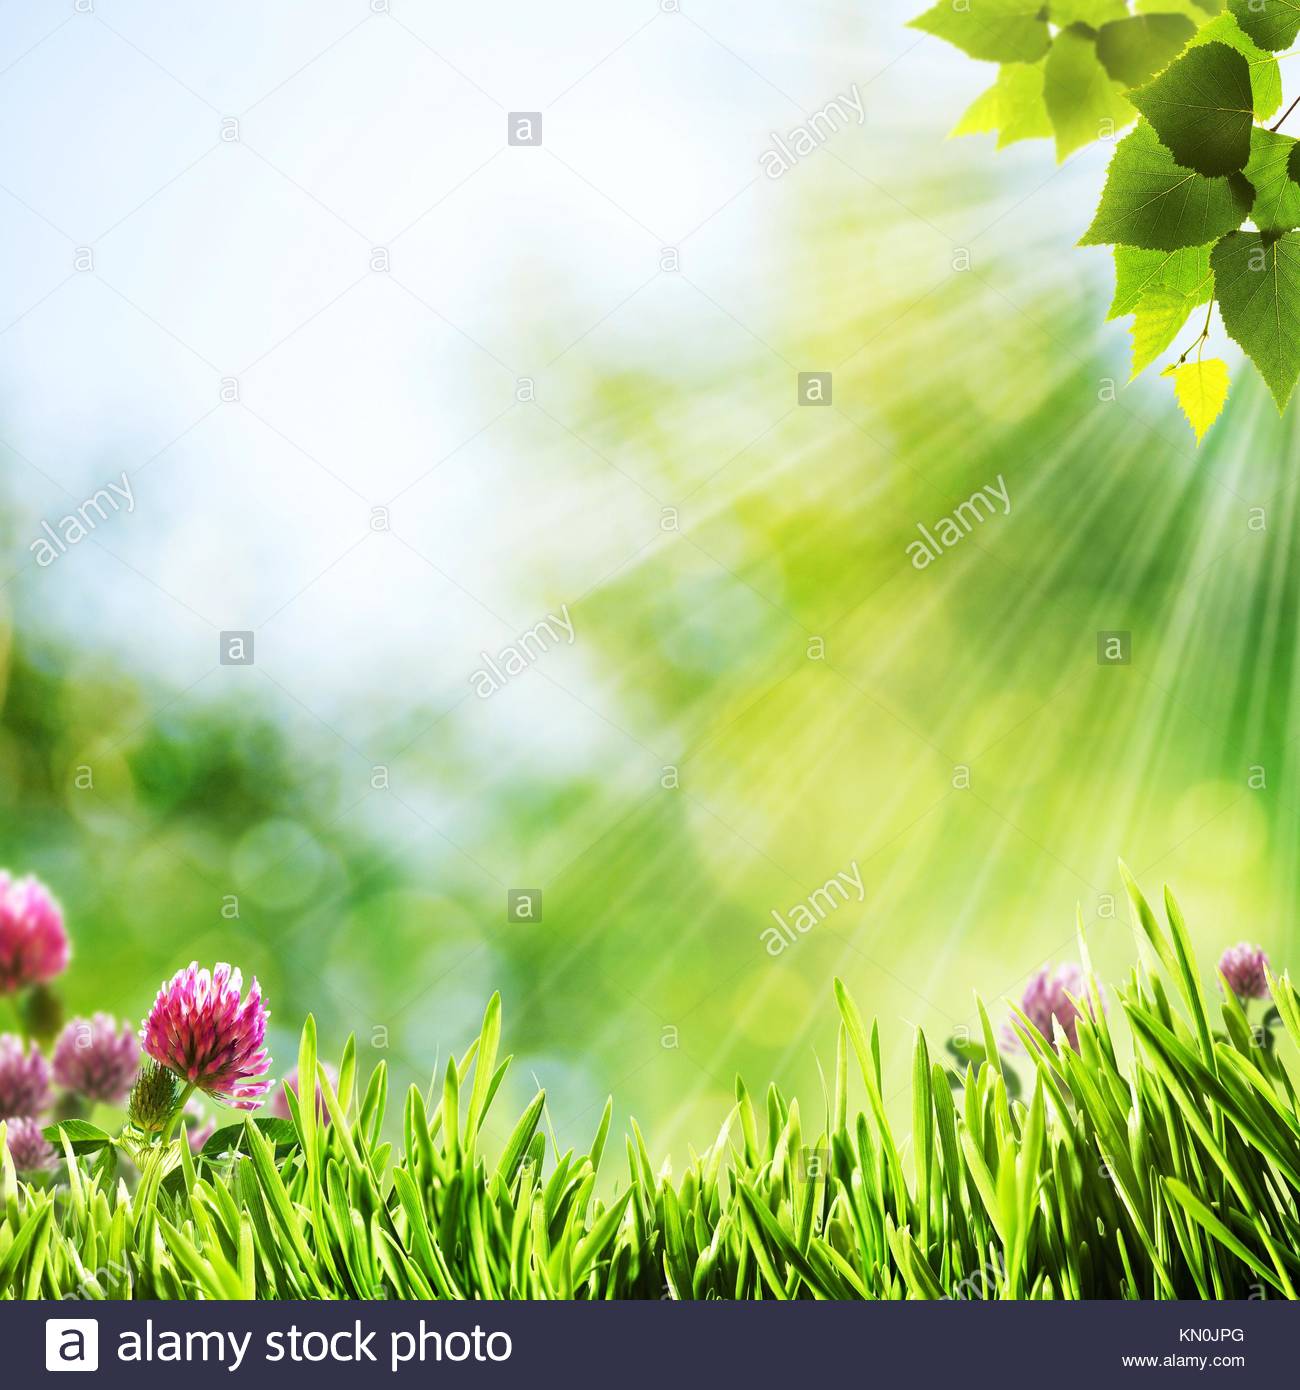 Have A Nice Day Abstract Natural Background Stock Photo